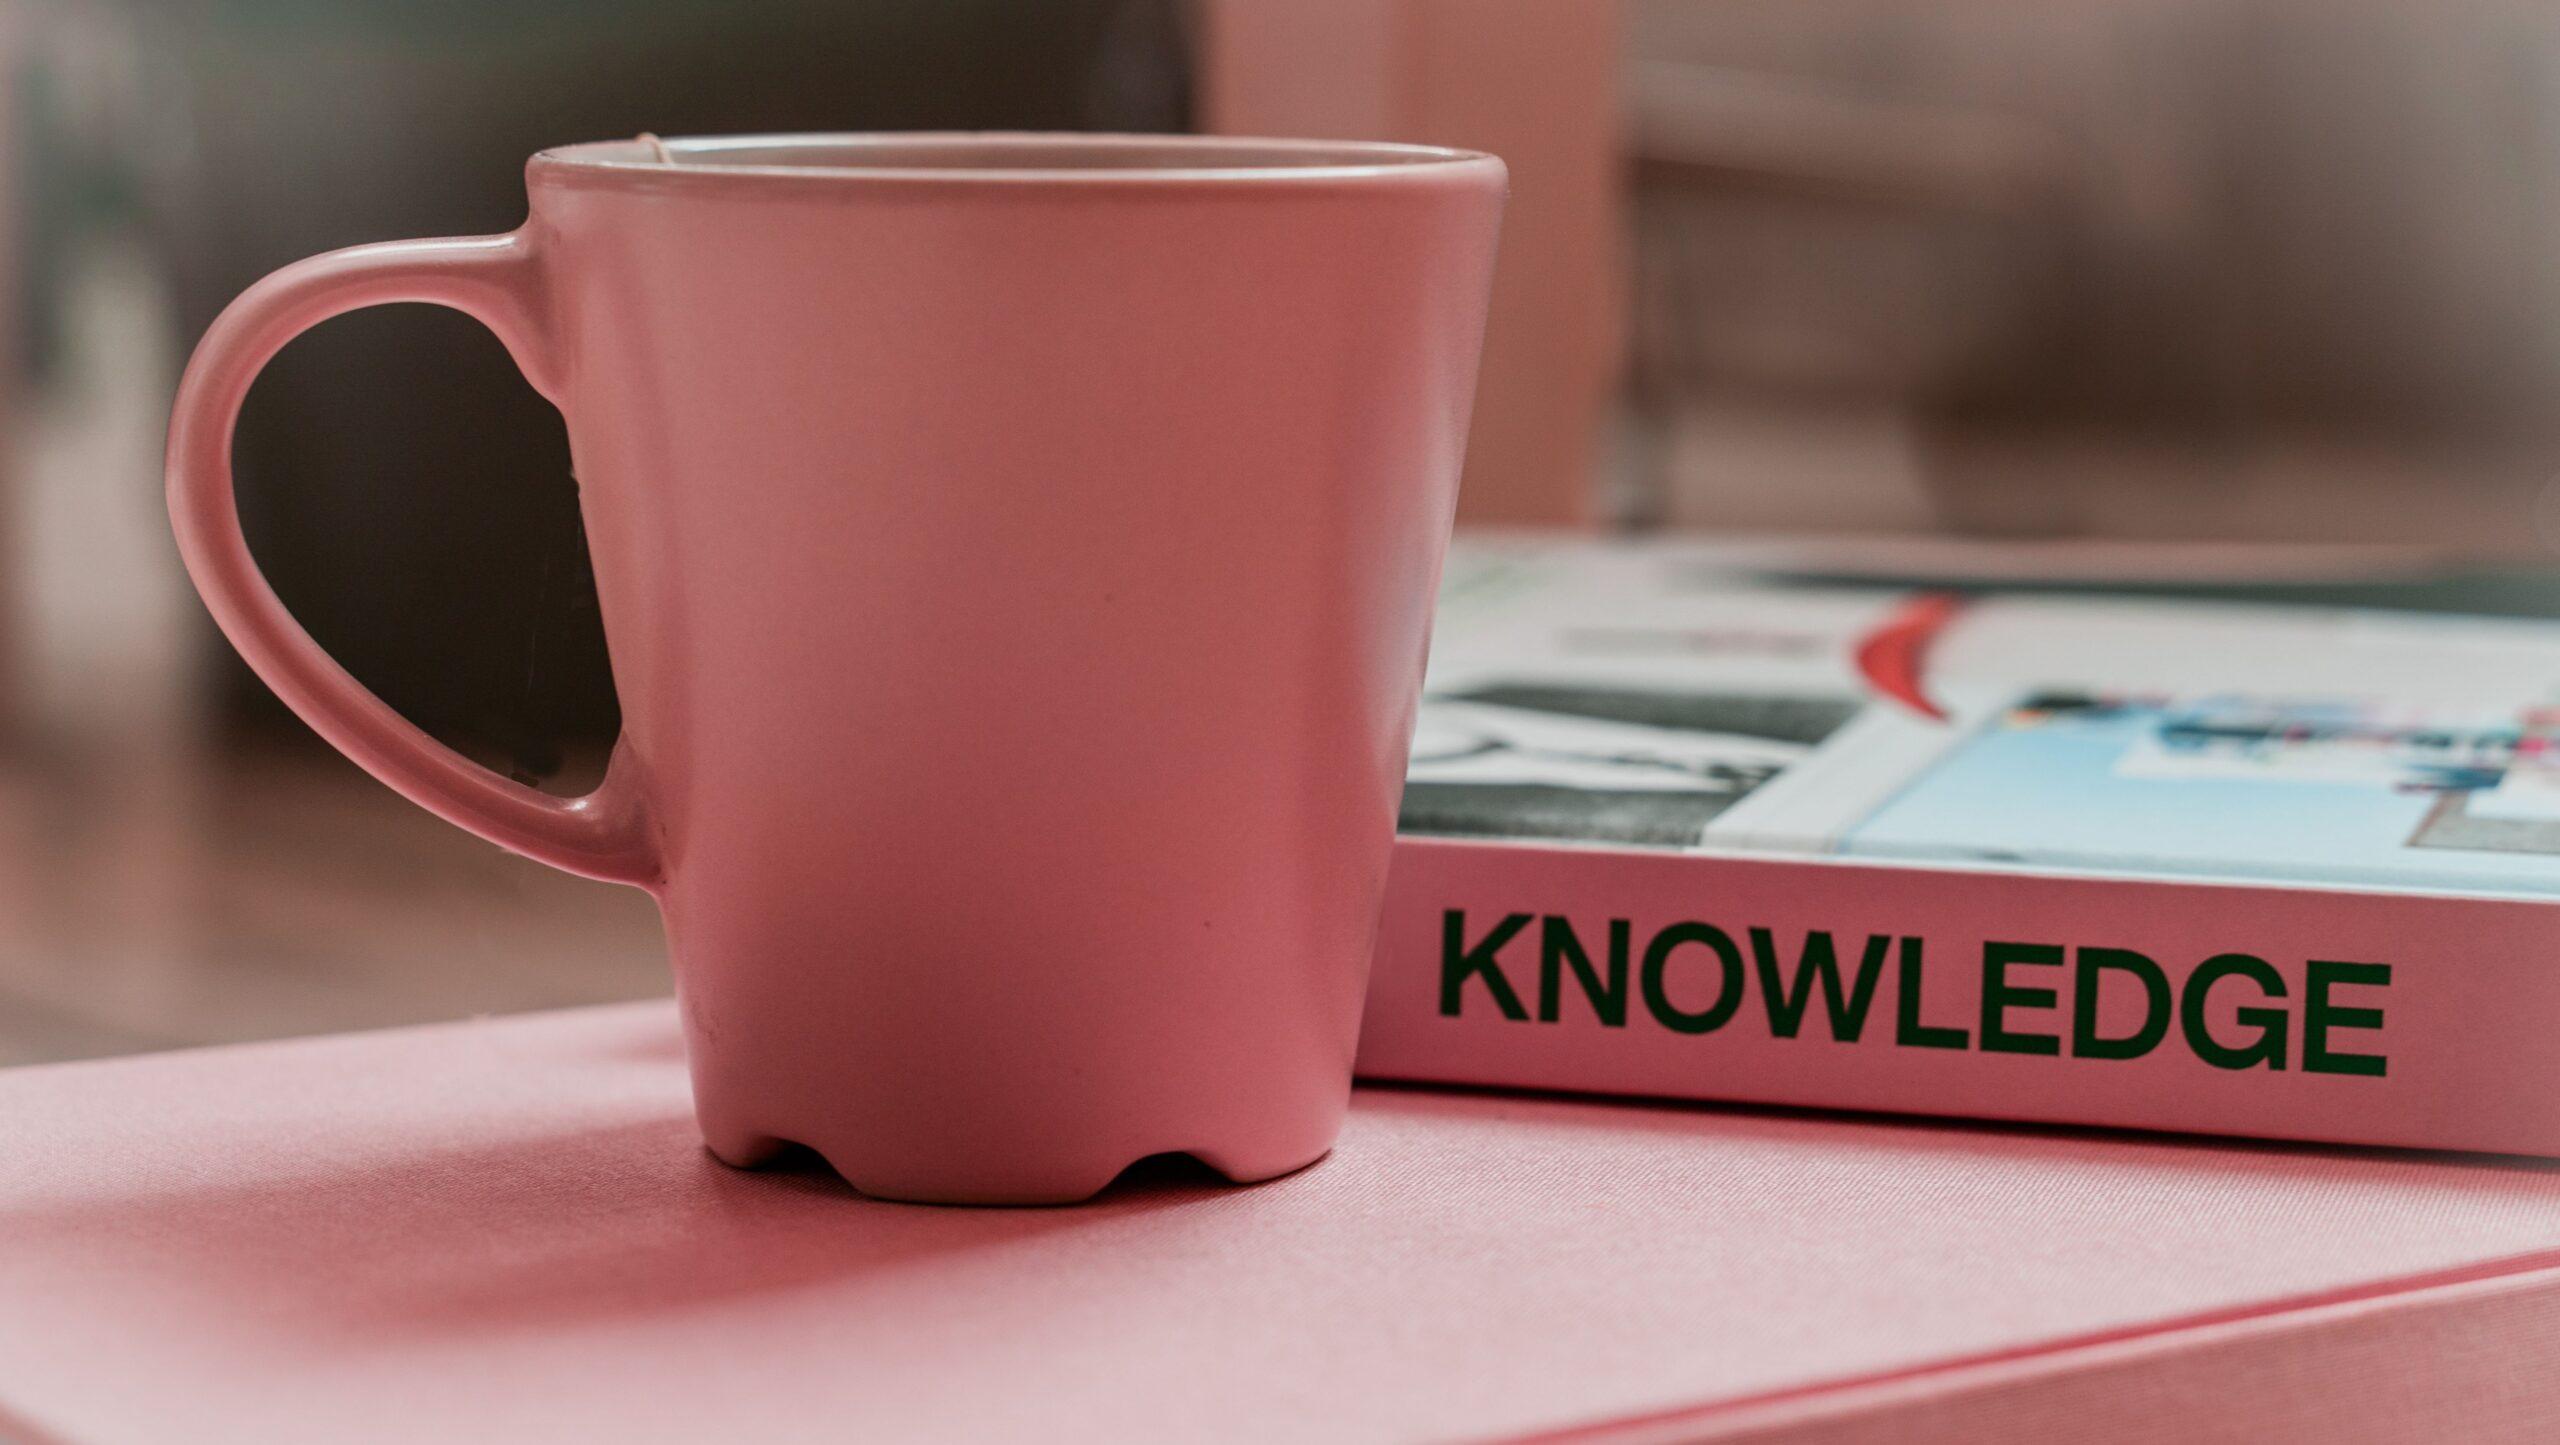 A pink-coloured mug placed on a book in front of another book that has the word 'knowledge' written in its spine.